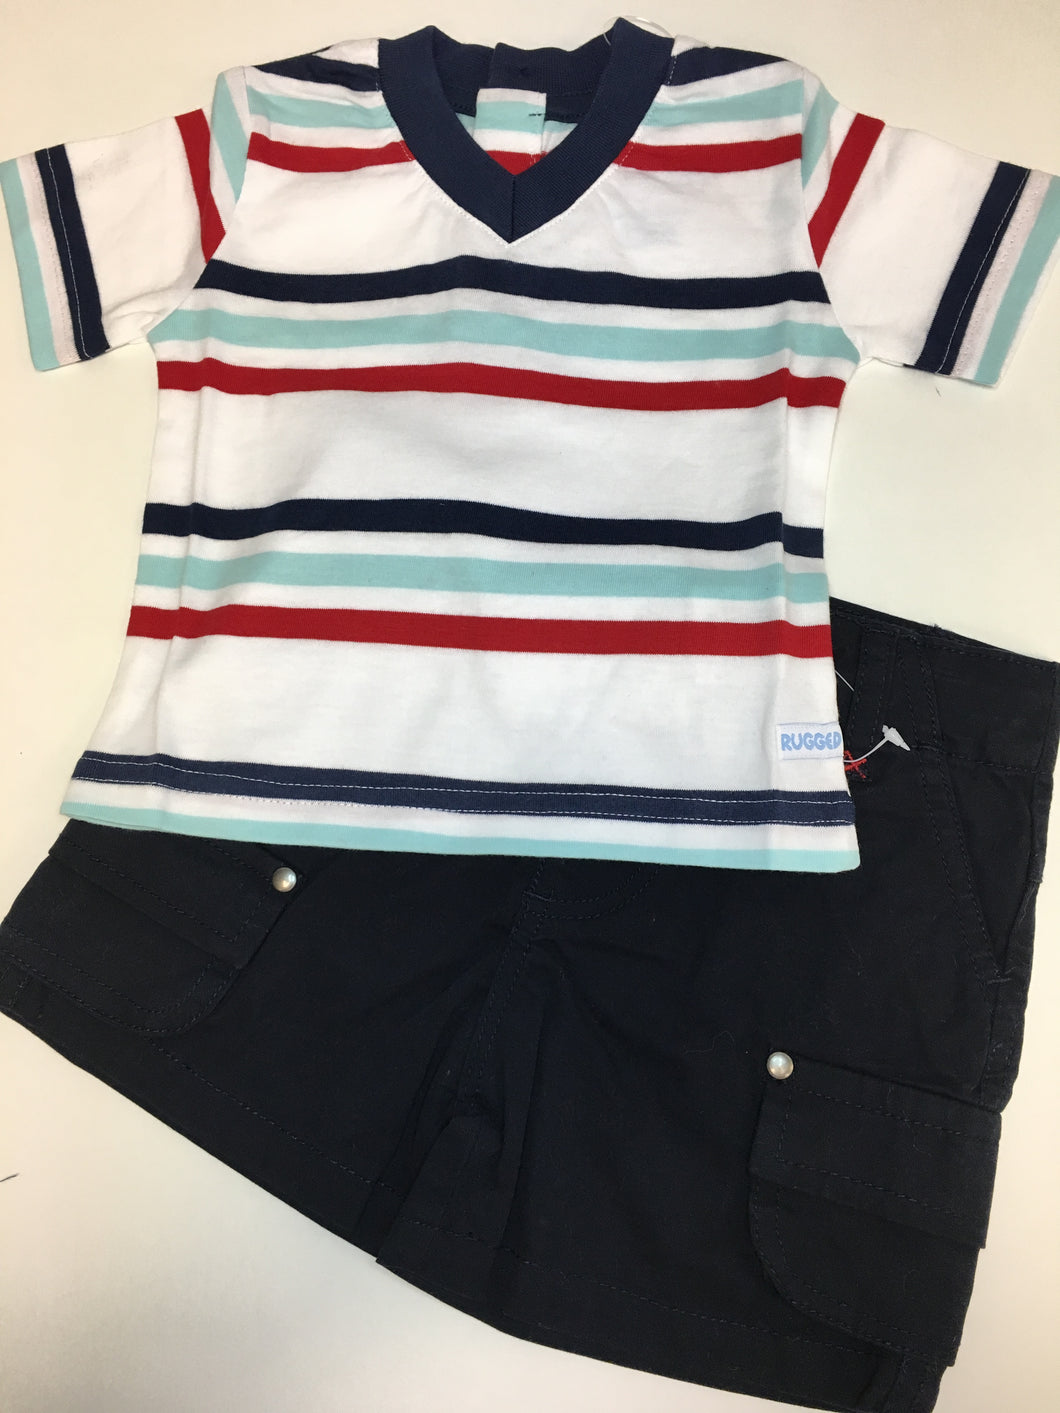 Red Navy Striped Tee Shirt